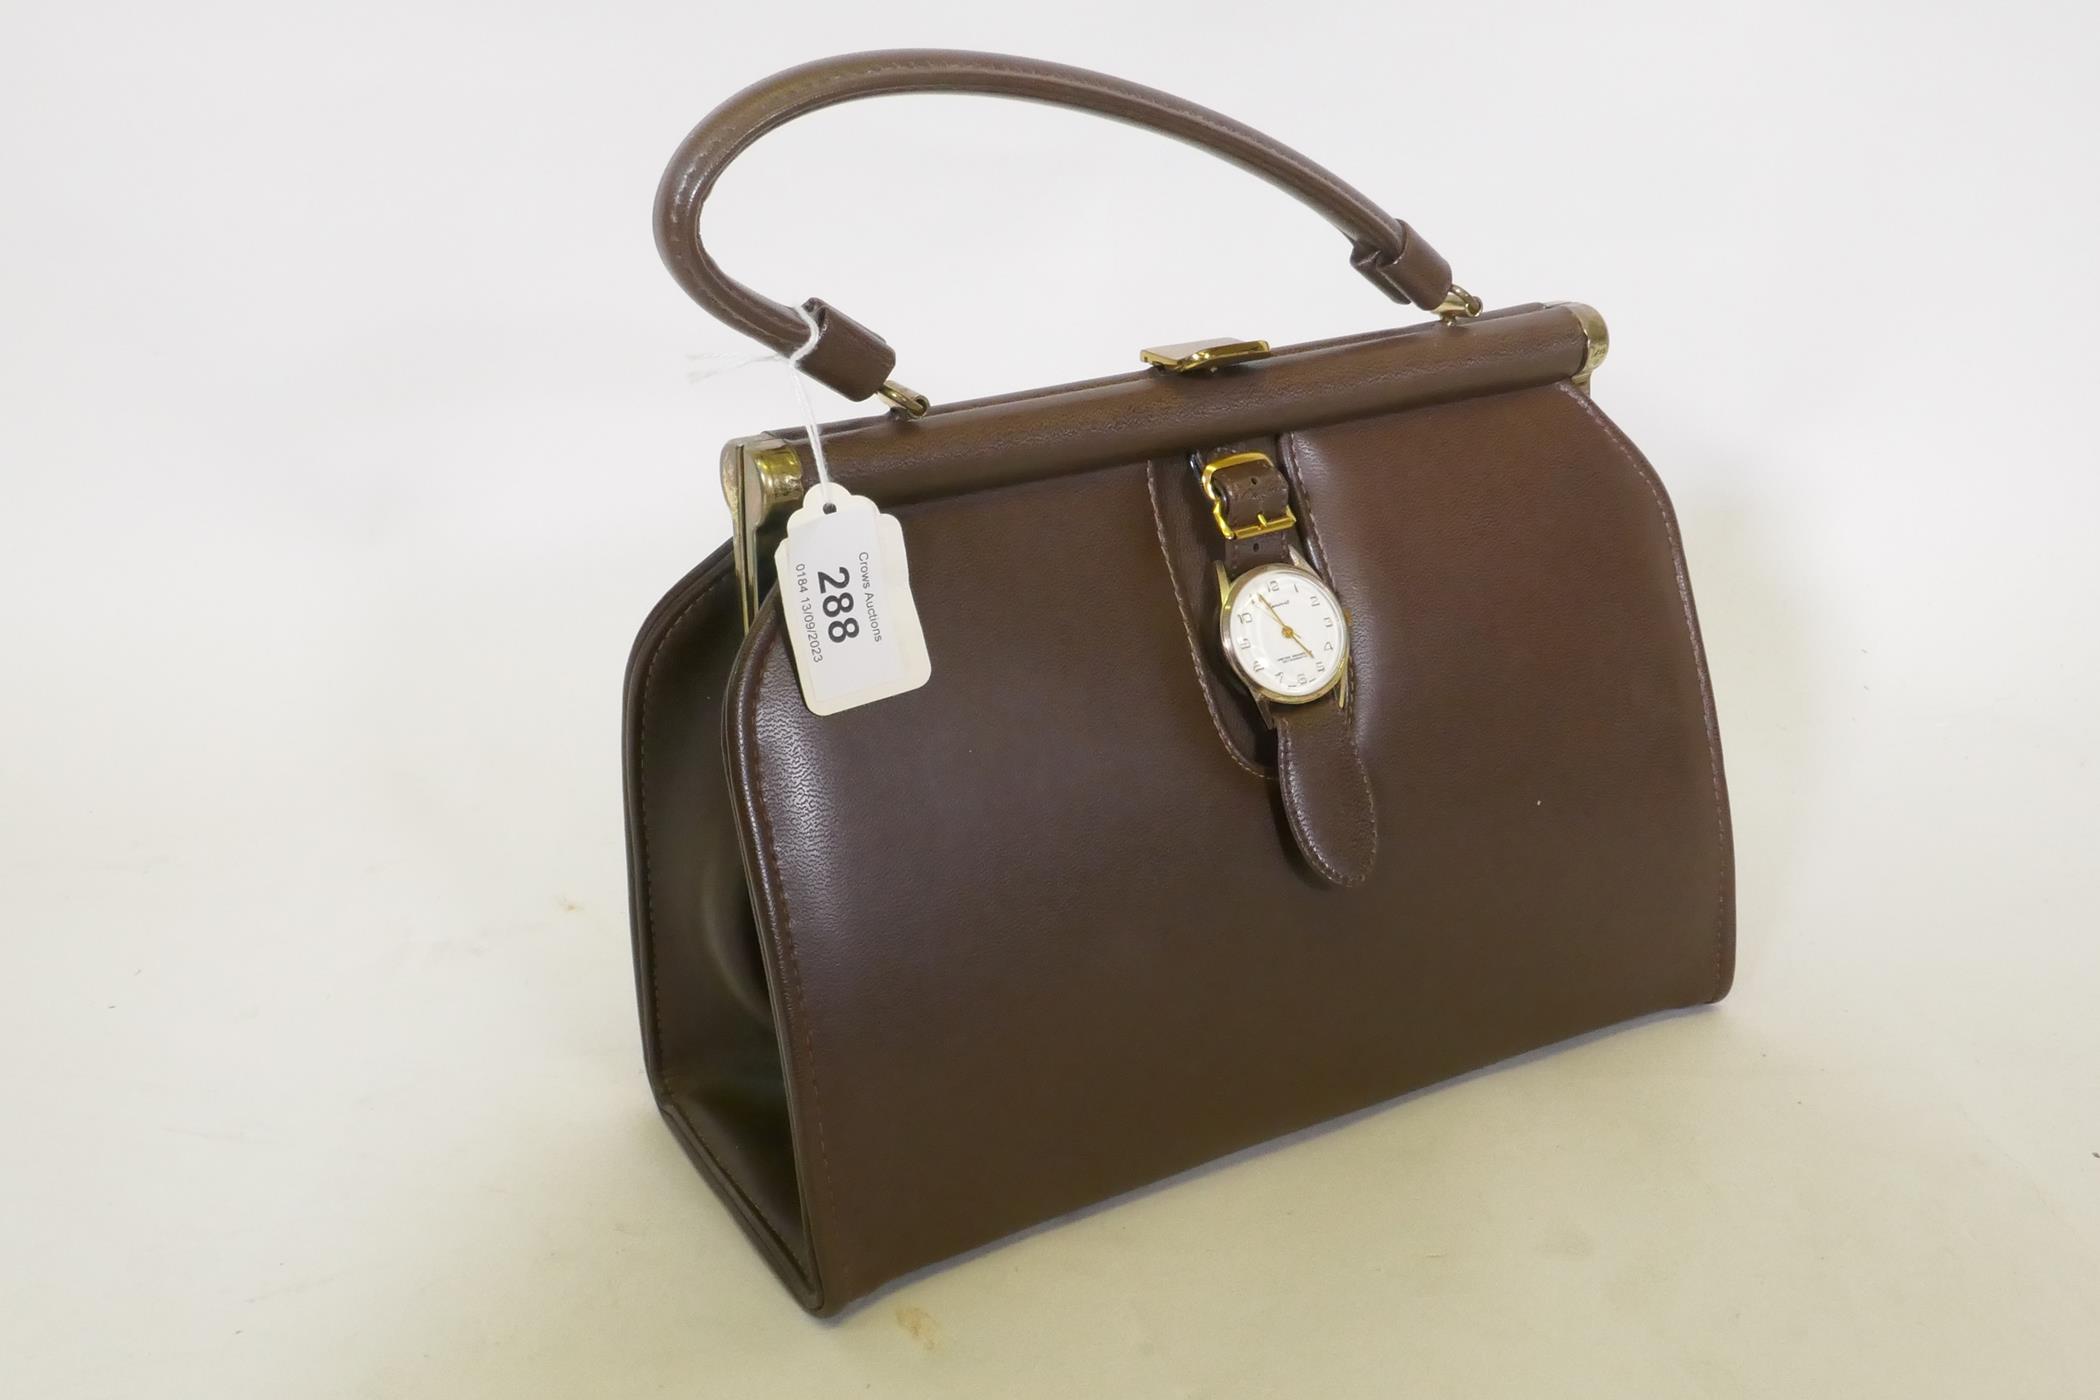 A vintage leather handbag with Genovit watch clasp and brass mounts, 27 x 20cm